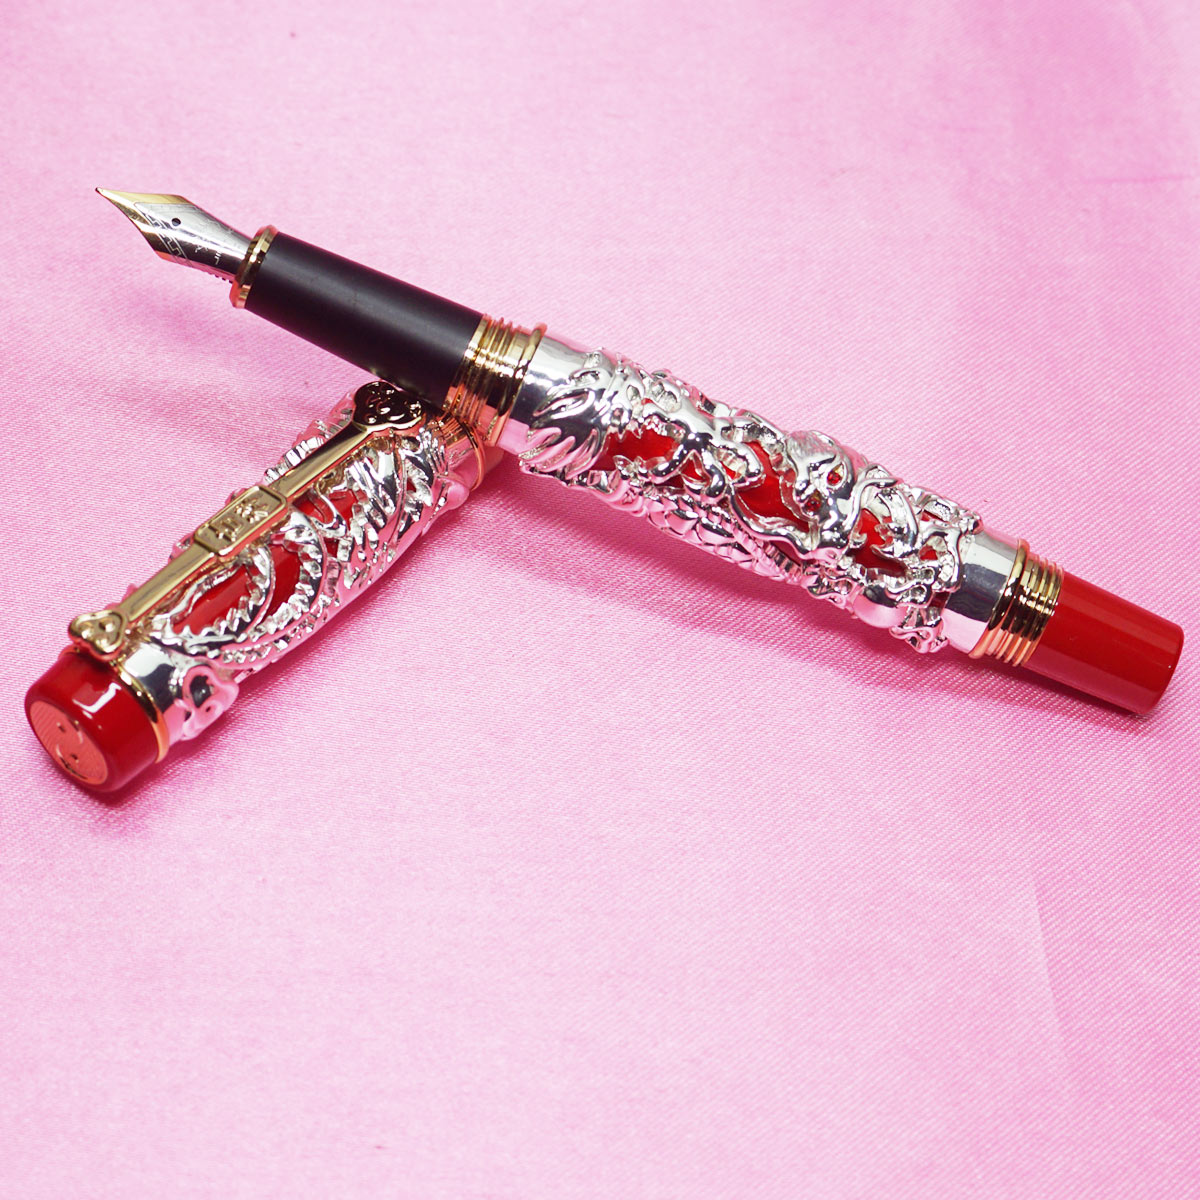 Jinhao 999 Dragon Embossed Silver Body Fountain Pen with Red and Gold Trims SKU 22318